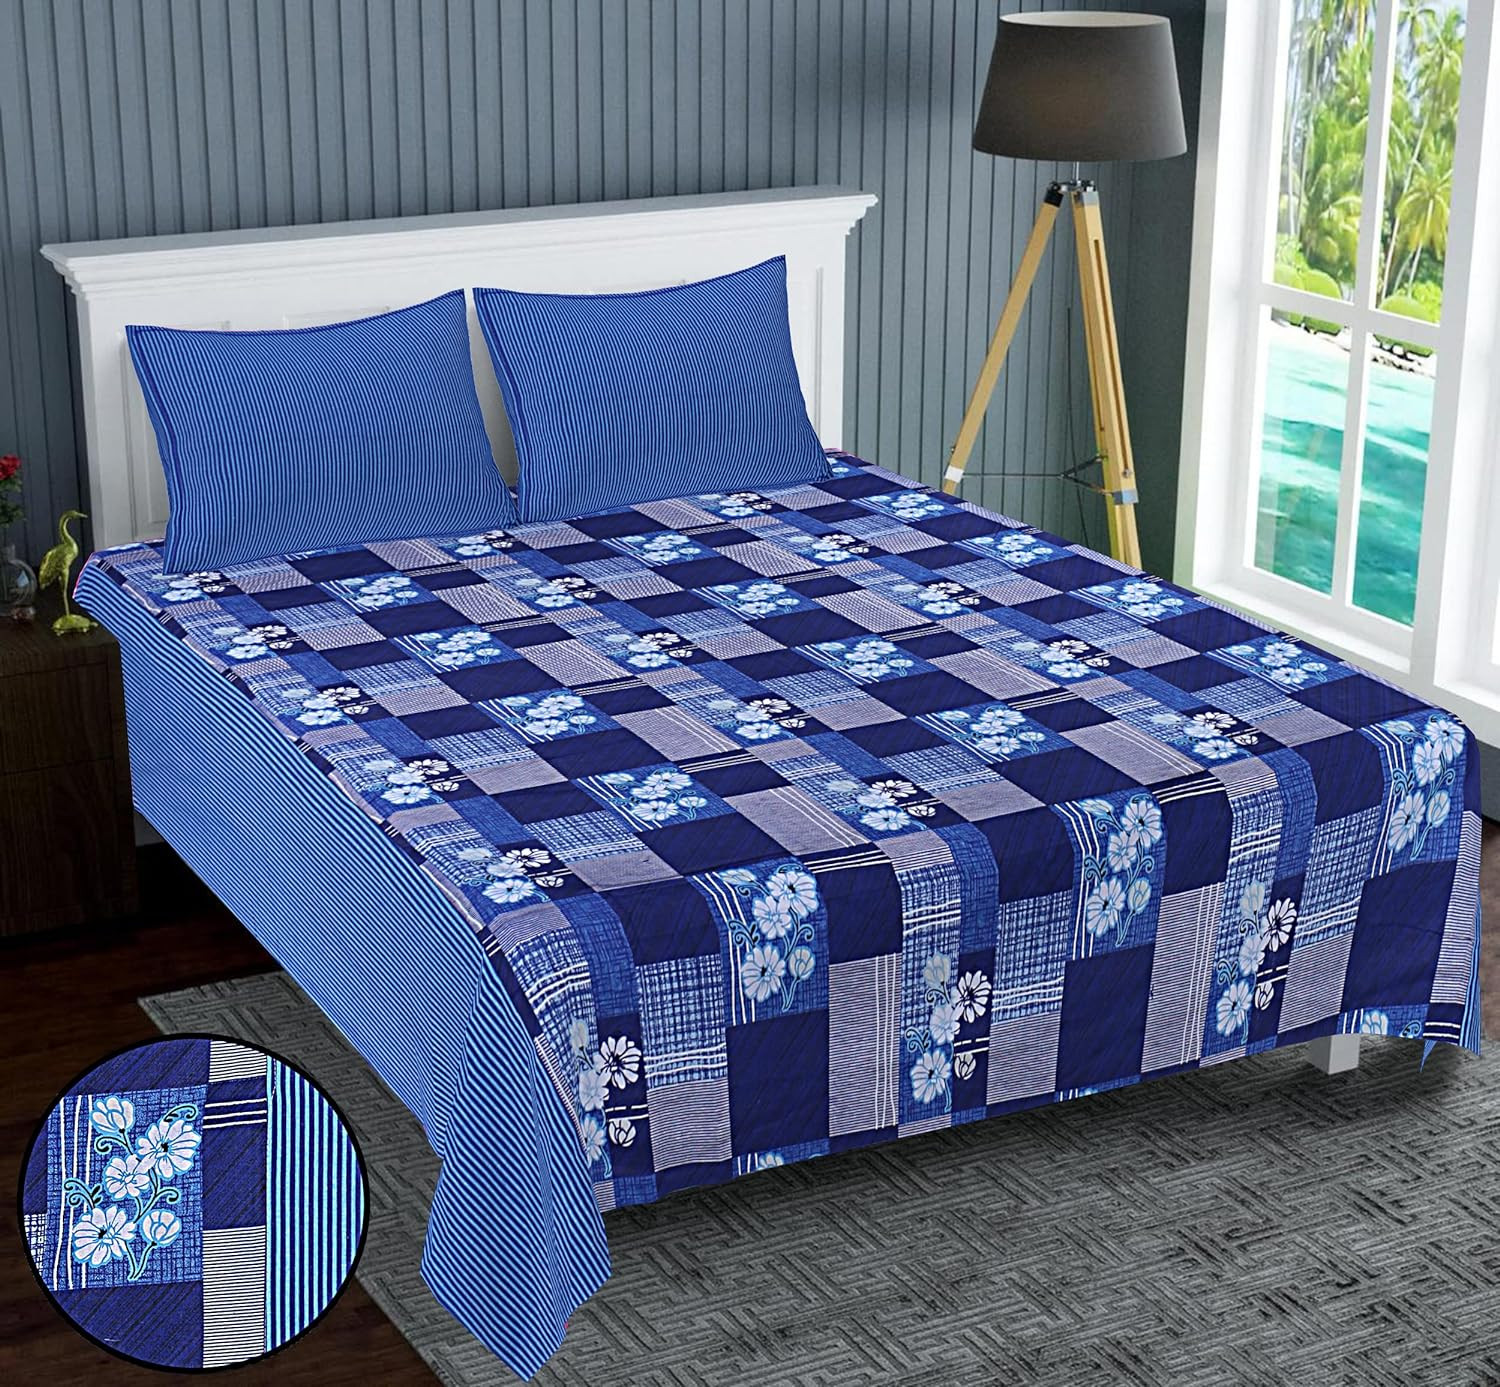 Kuber Industries Double Bedsheet(228*254 cm)|Cotton 120 TC Luxury Printed Soft & Lightweight Bedsheet for Double Bed with 2 Pillow Covers (Blue)